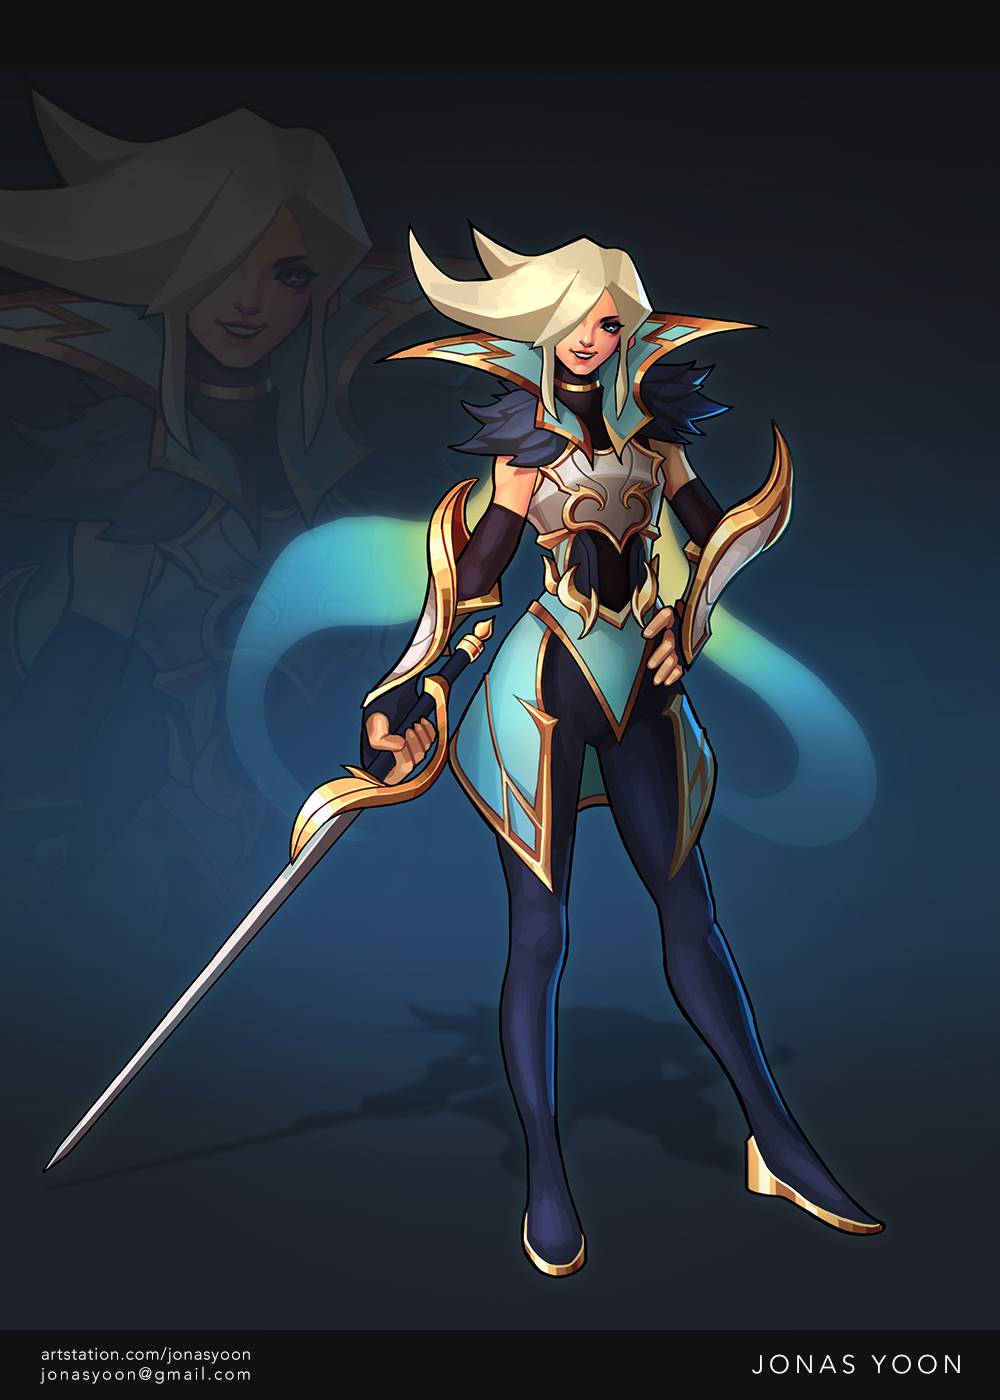 "Angelic looking woman with sweeping blonde hair.  Has glowing blue ""wings"" and holding a sword."